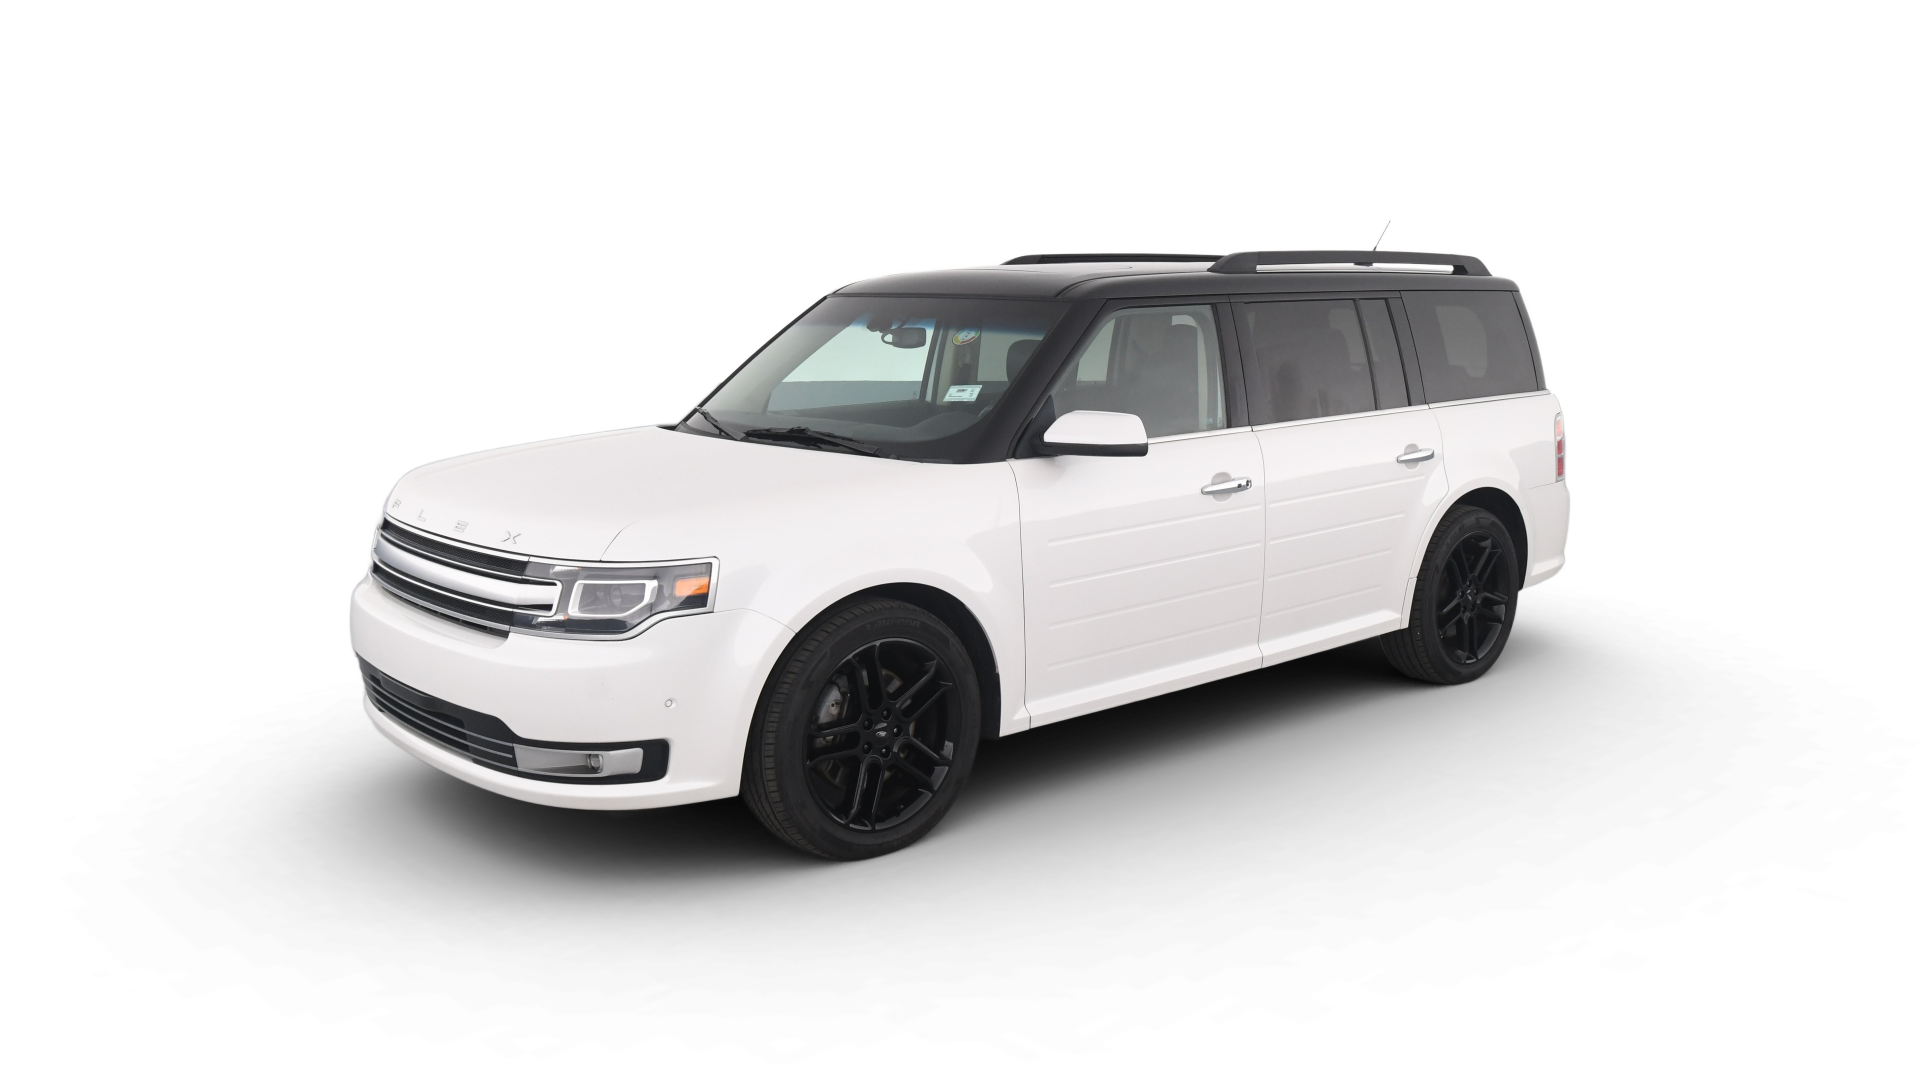 Used Ford Flex For Sale Online | Carvana